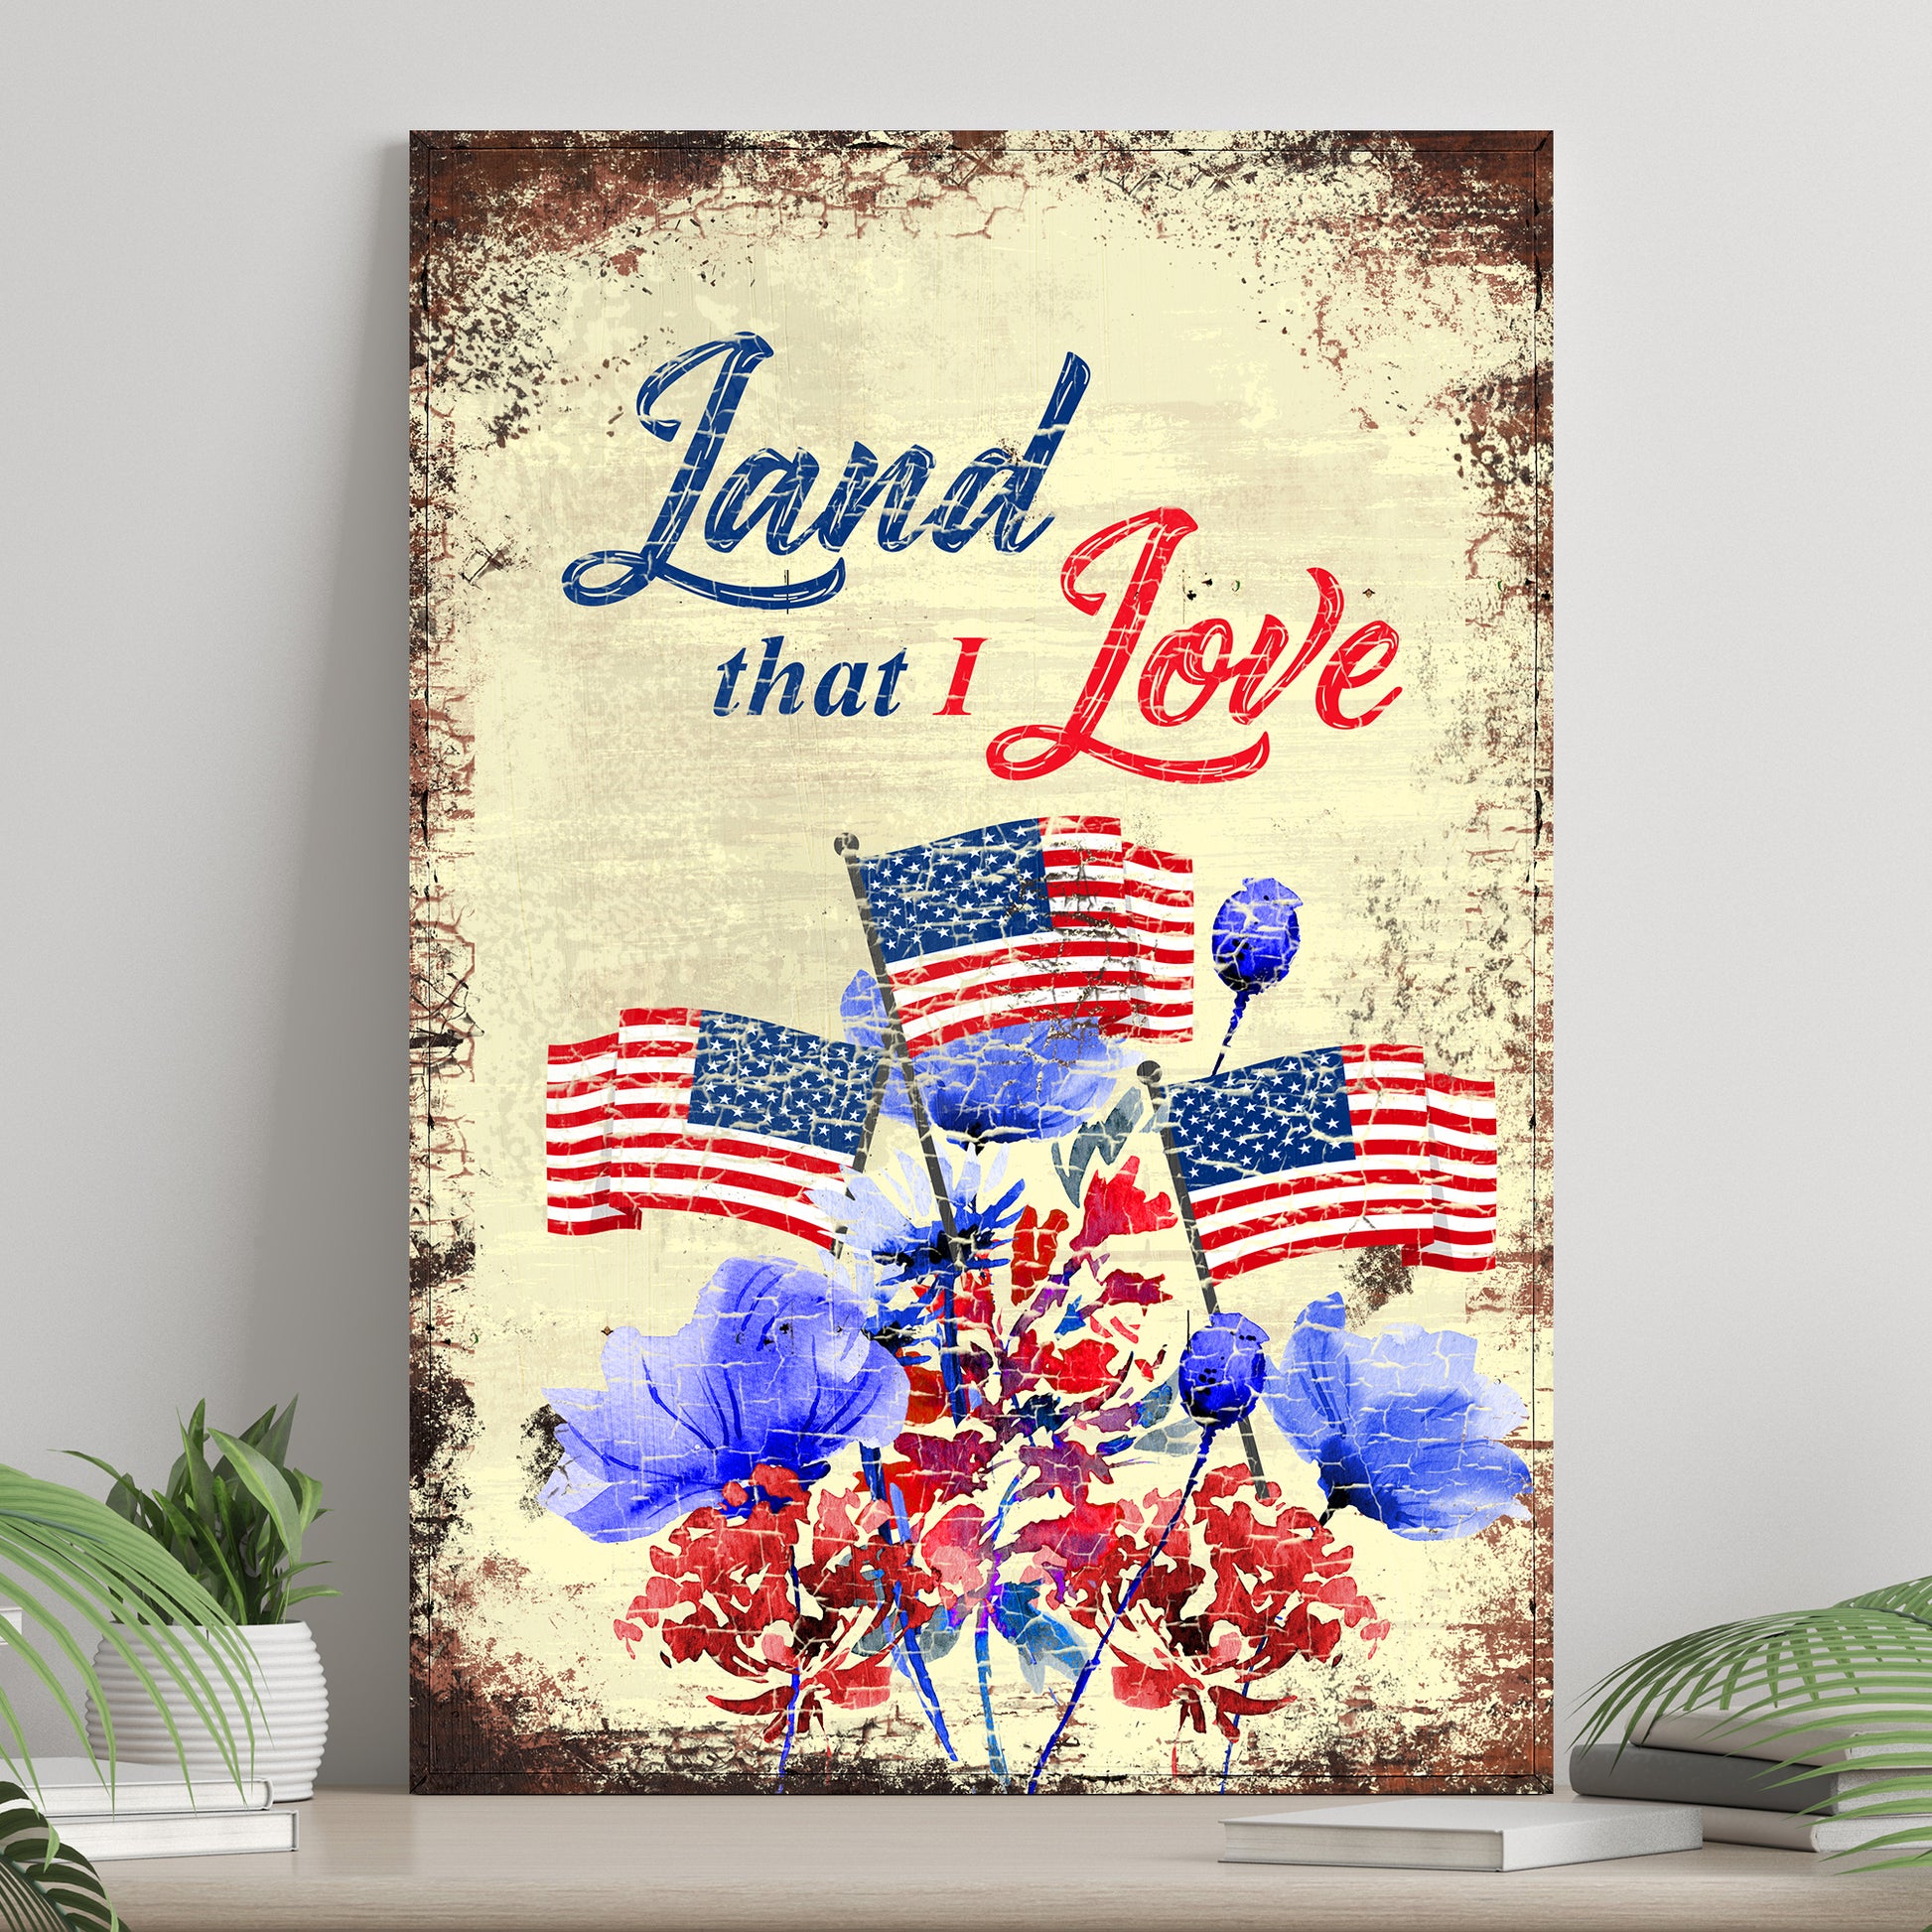 America Land That I Love Sign - Image by Tailored Canvases